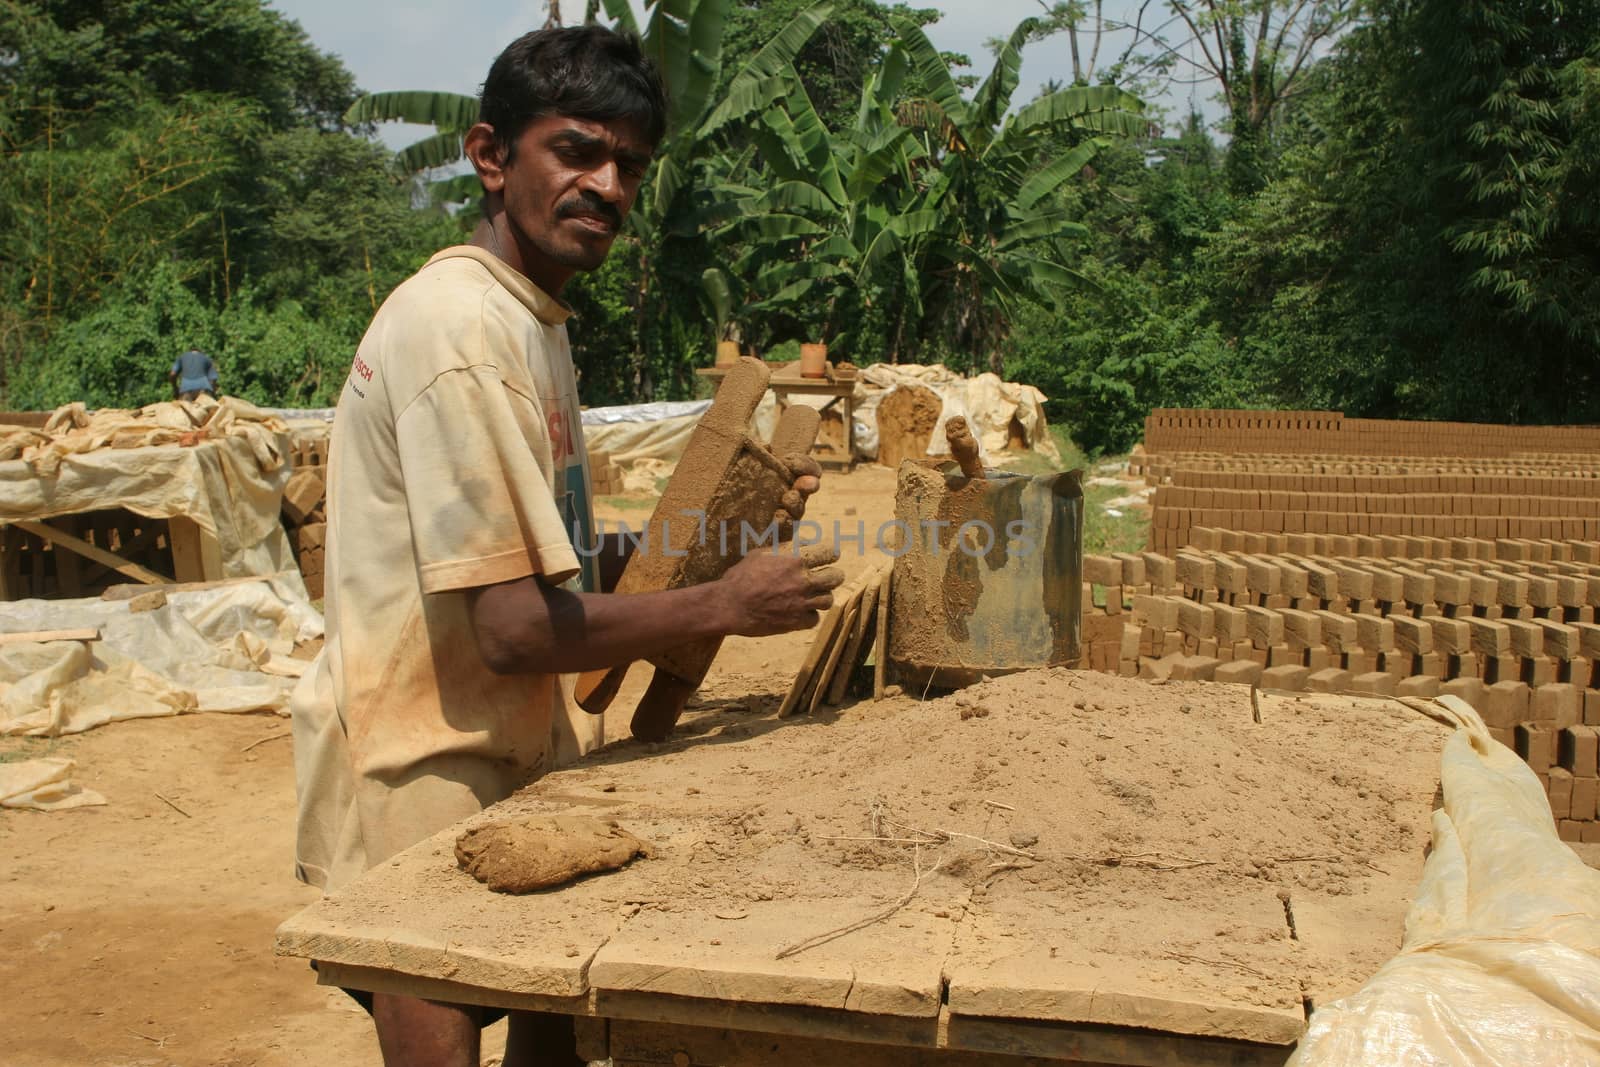 Sri Lanka 4.5.2006 worker shaping traditional mud bricks to manufacture  by kgboxford